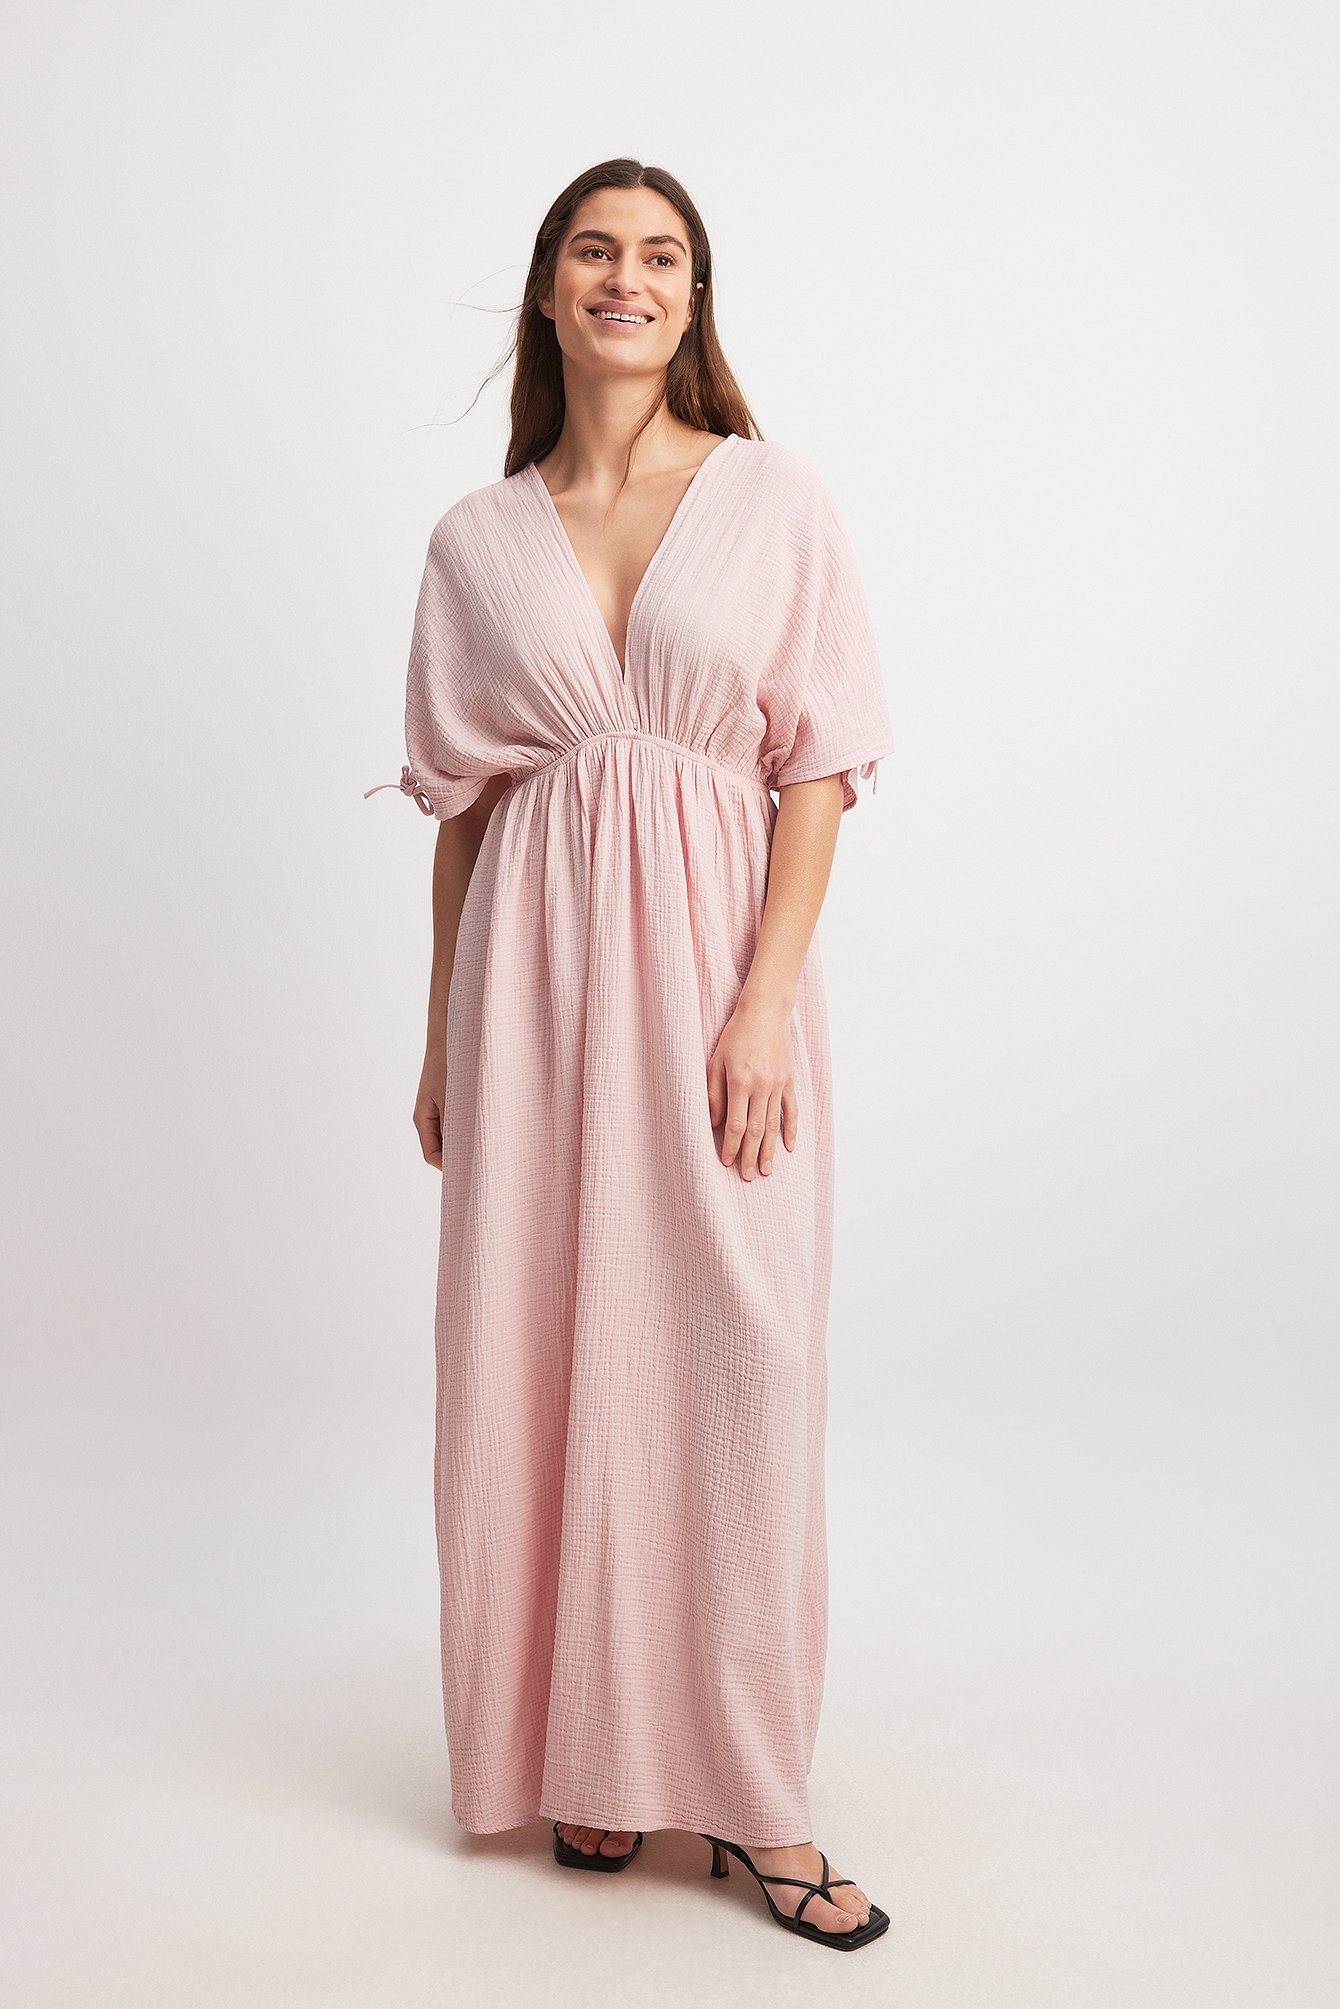 Dusty Rose V-neck Front and Back Maxi Dress